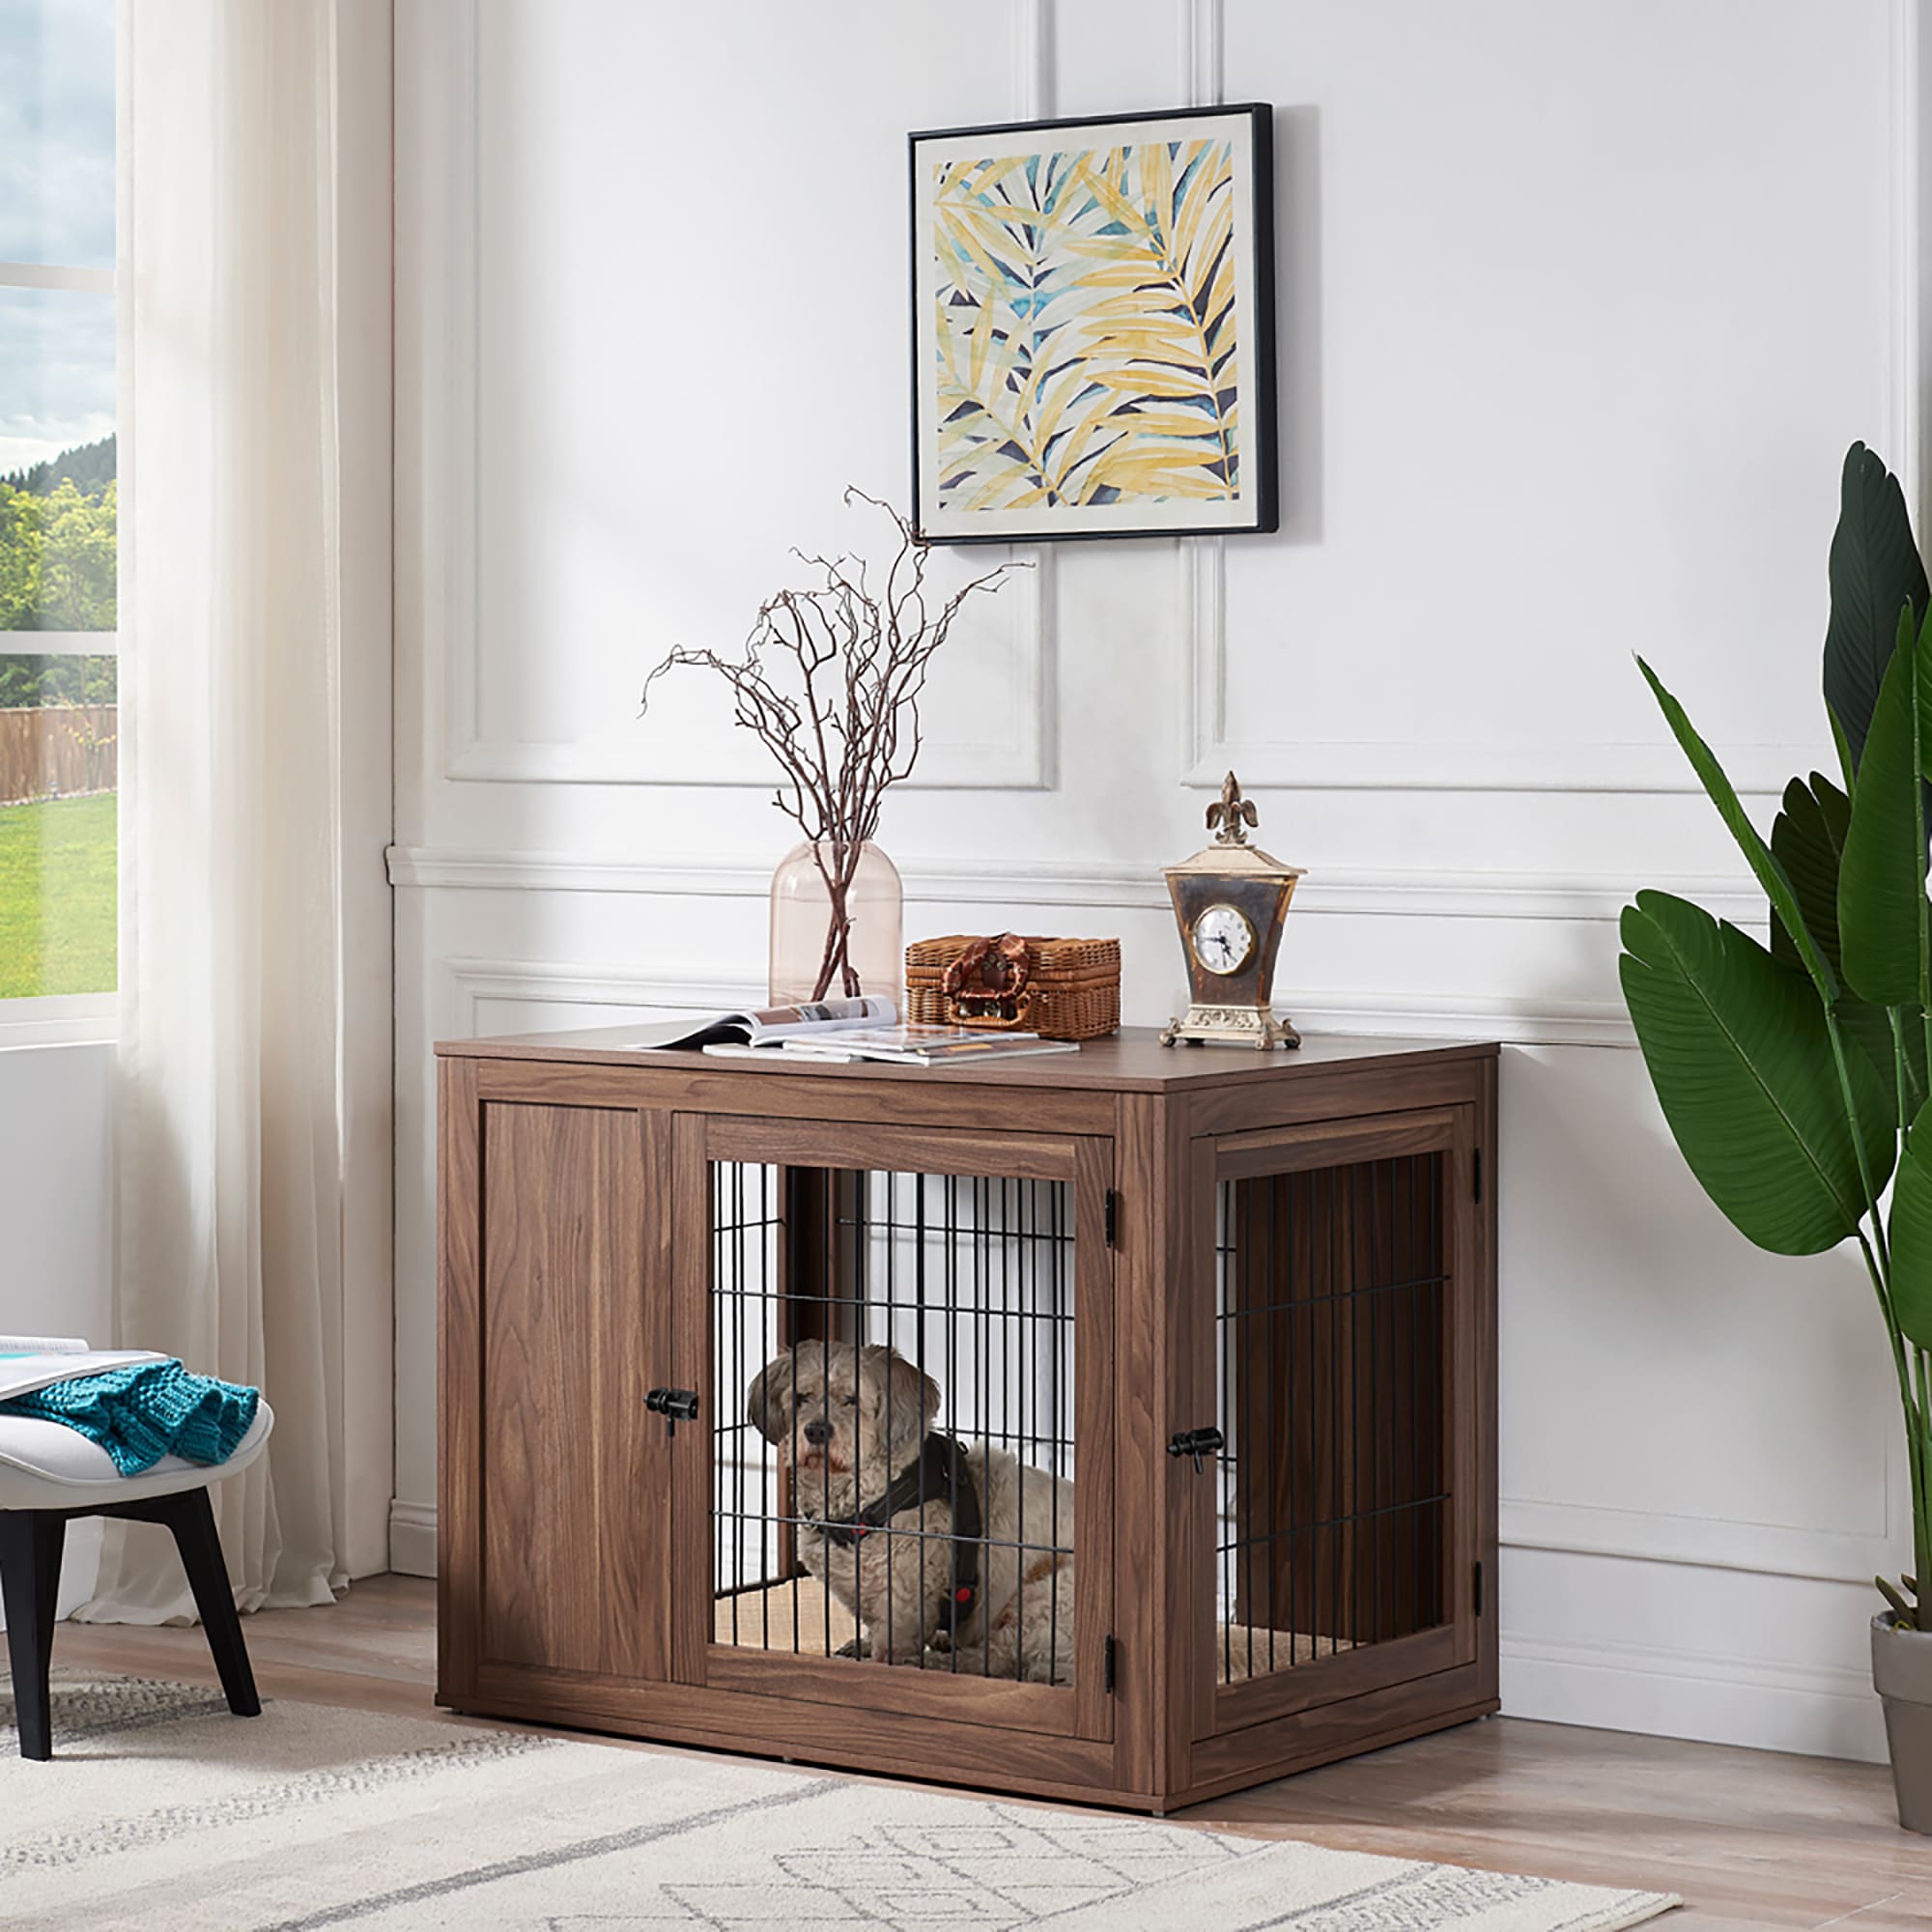 Large Indoor Pet Crate End Table Furniture Wood Family Room Bedroom Furniture 